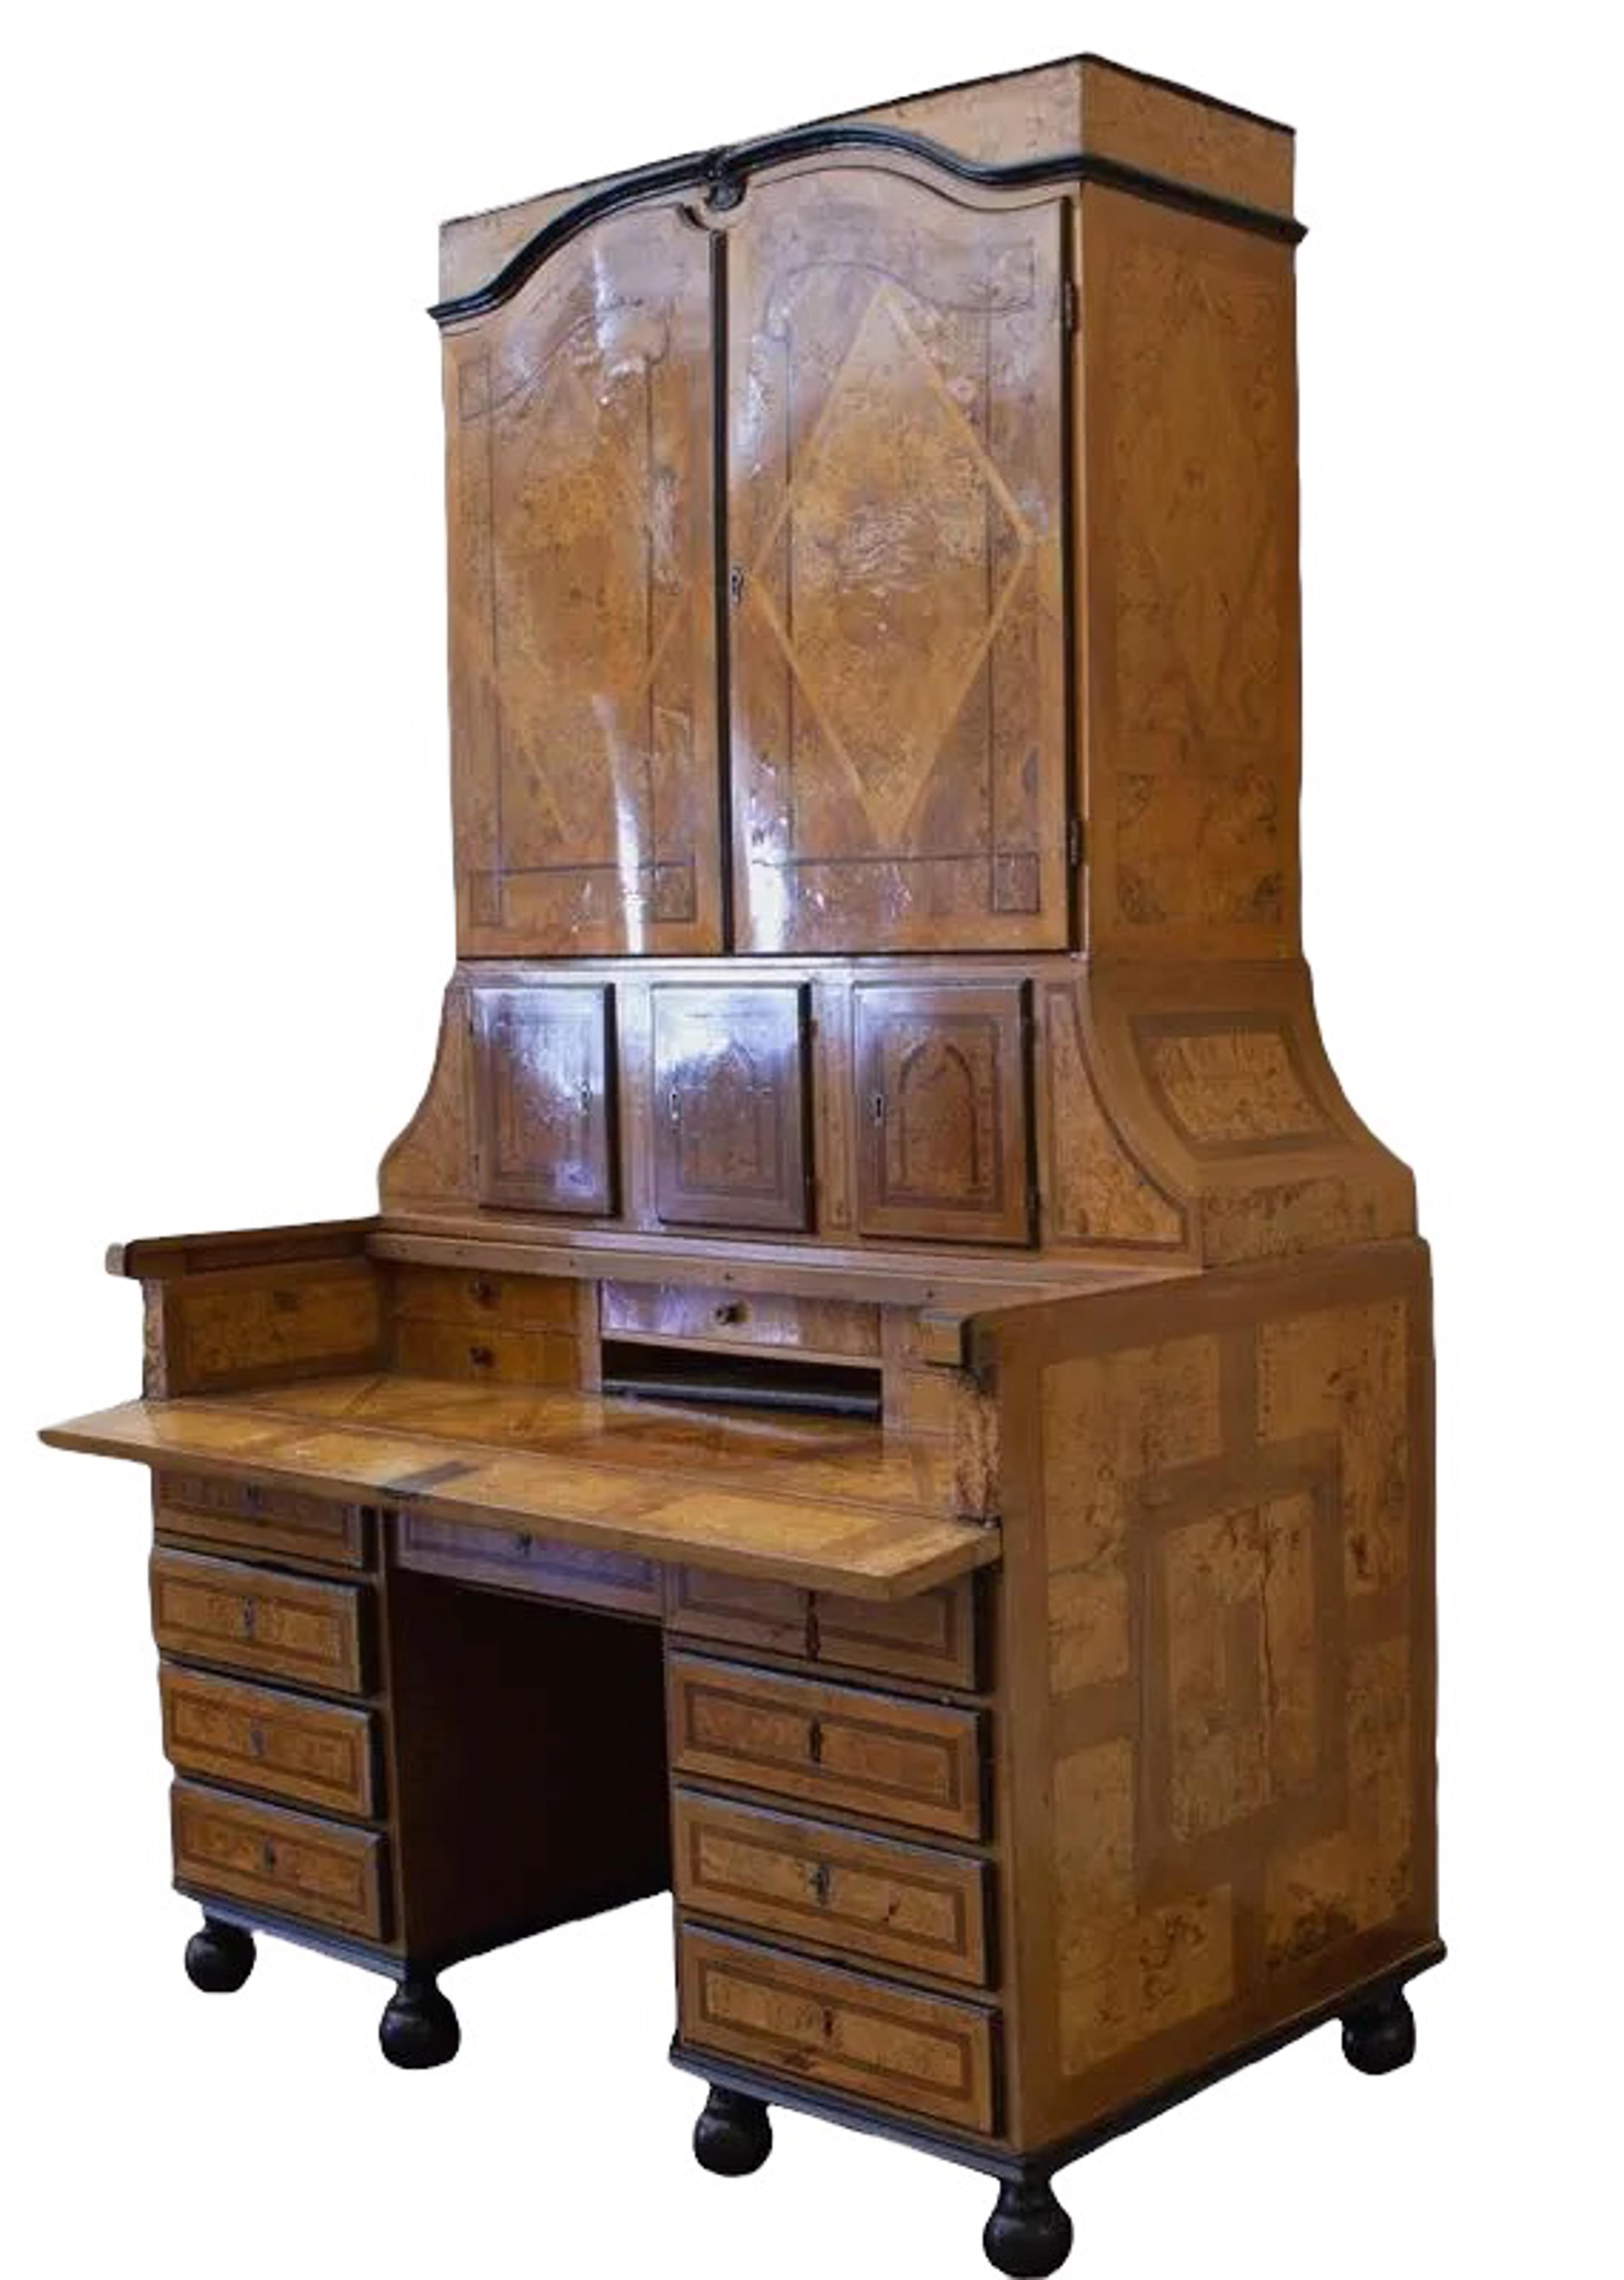 Hand-Carved 18th Century German Burr Elm and Walnut Secretary, with Ebonized Trim and Inlaid For Sale